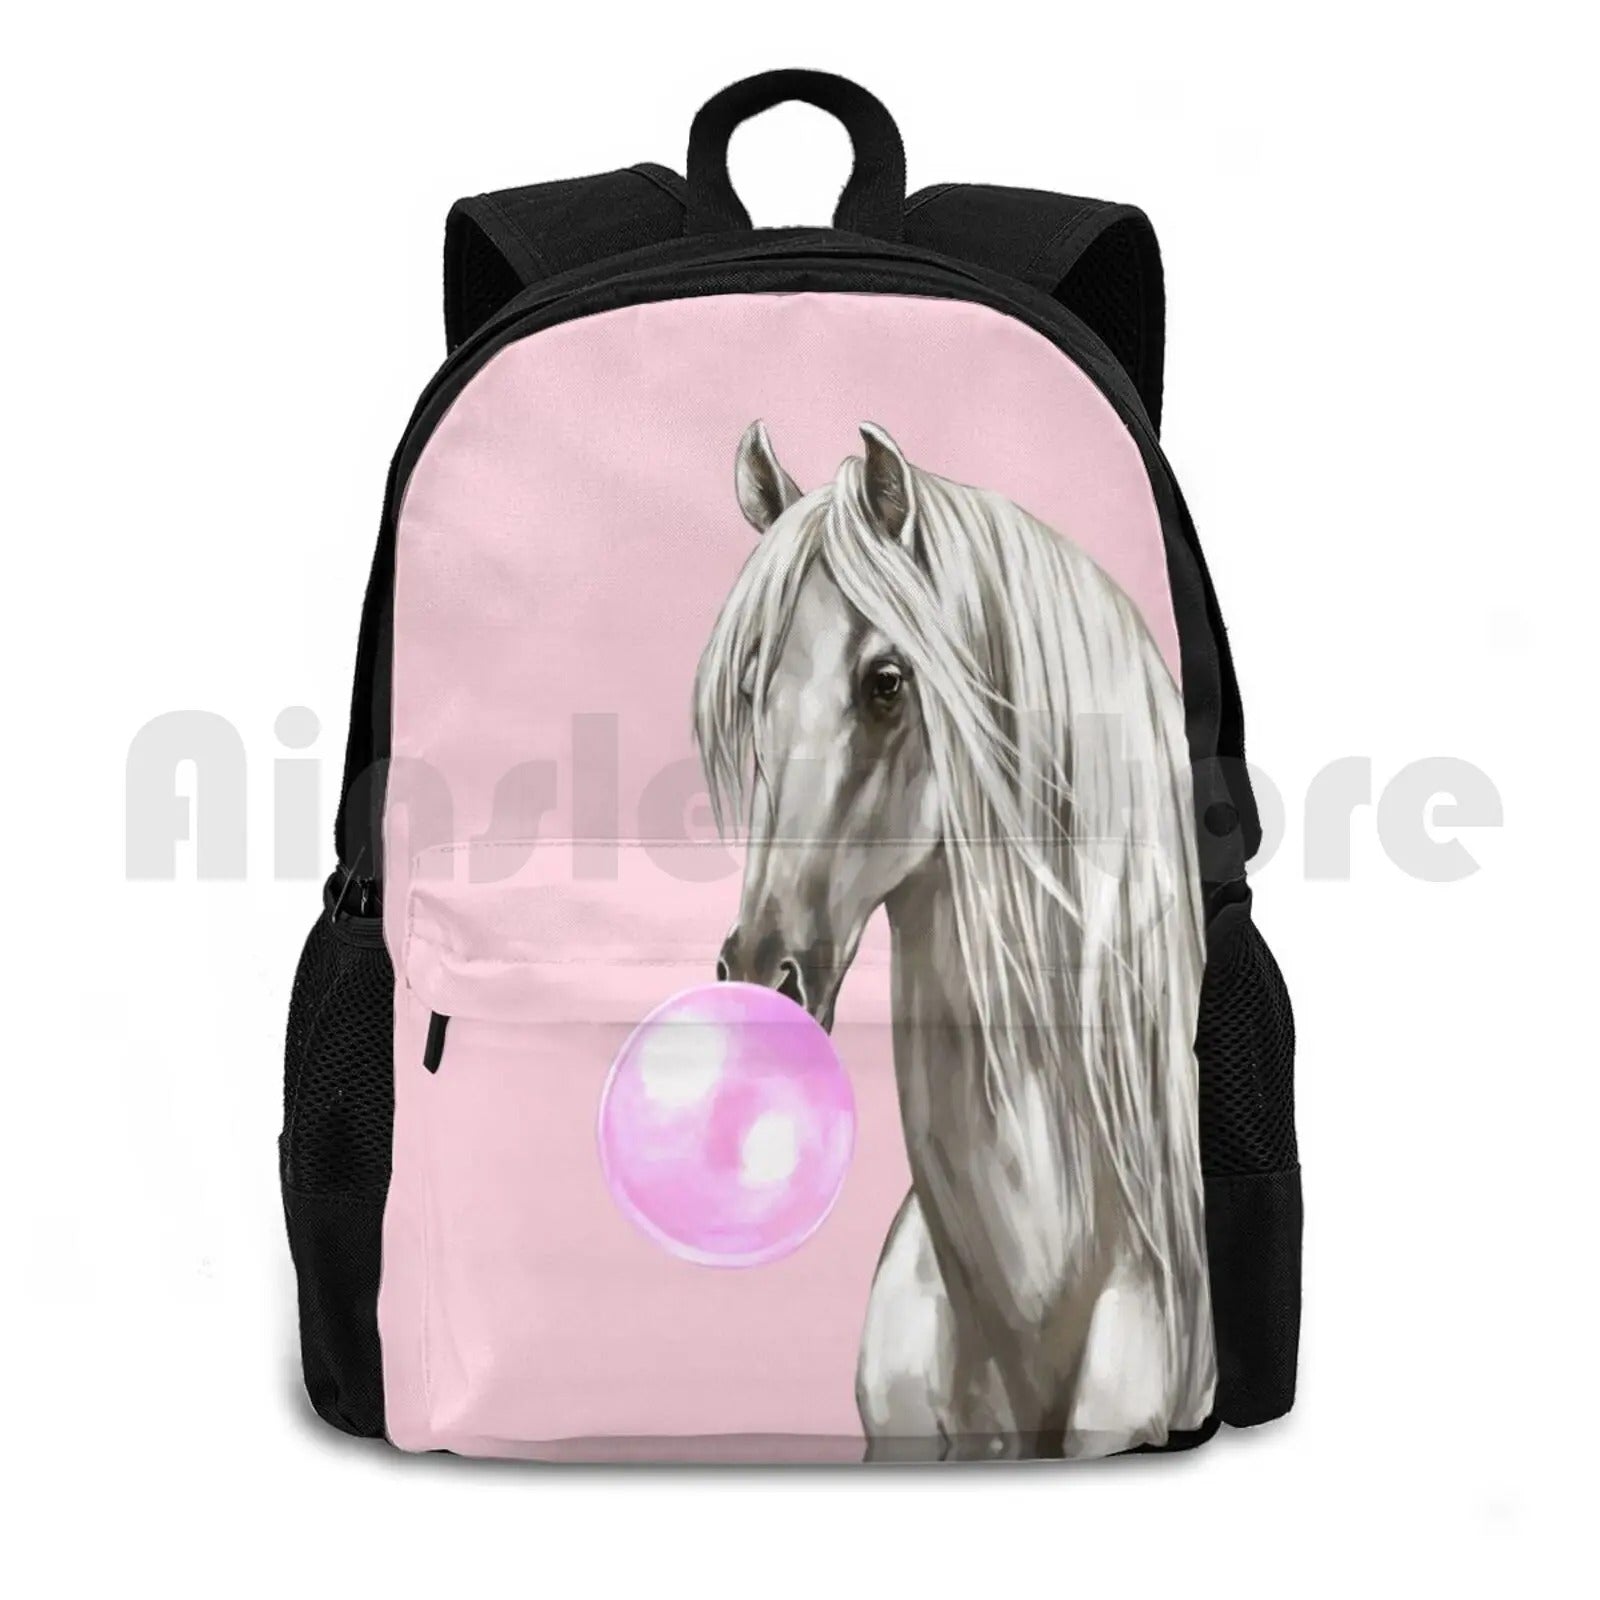 Backpack with Horse on It - Backpack - Black